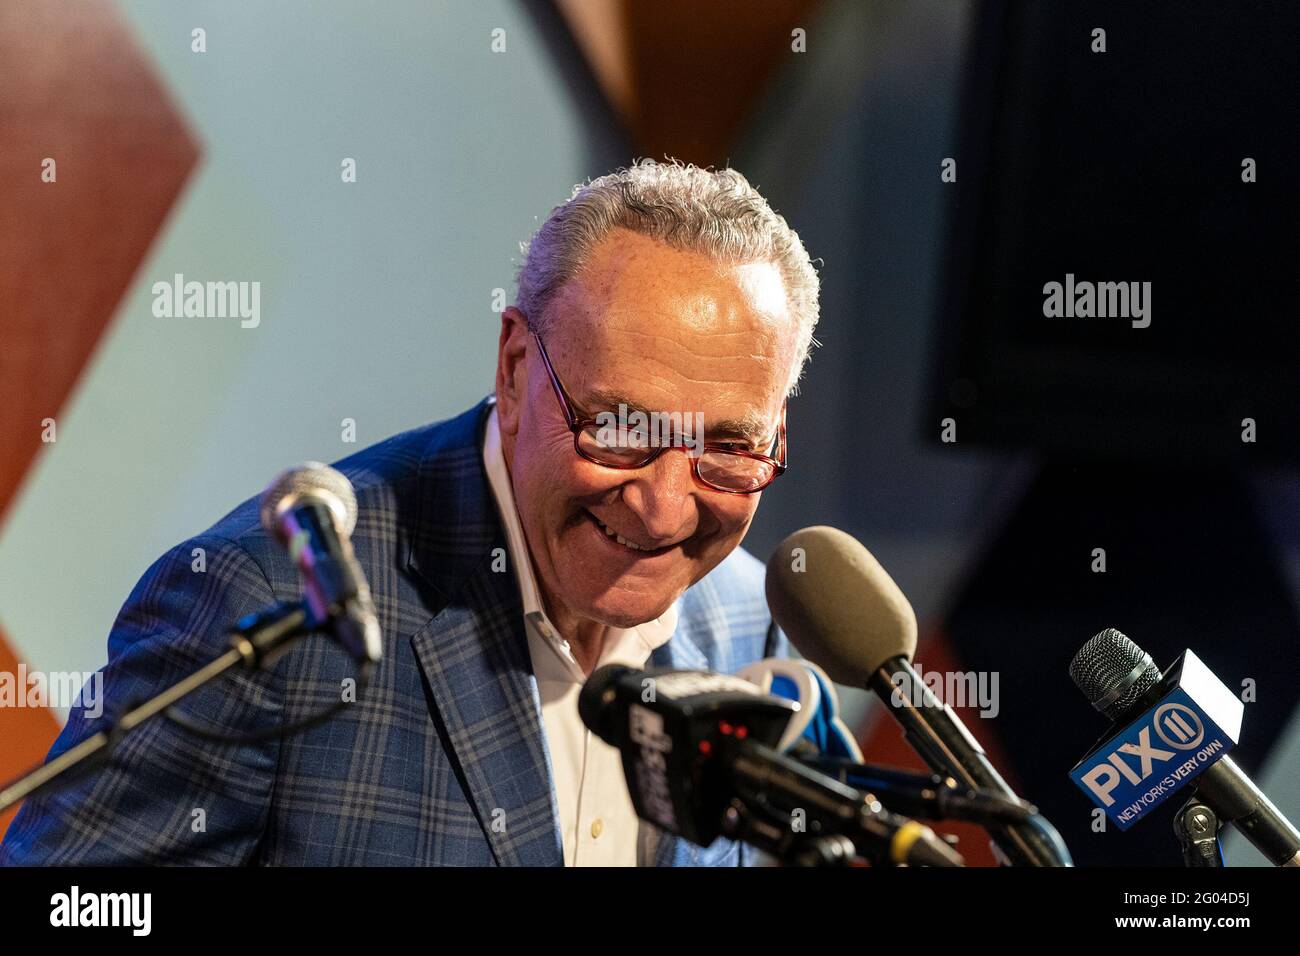 New York, United States. 31st May, 2021. U. S. Senator Charles Schumer speaks at Carolines on Broadway comedy club re-opening after pandemic ceremony. Senator Charles Schumer lauded Safe our Stages (SOS) bill passed by Senate to help cultural venues to survive pandemic. He also cracked few jokes saying it is comedy club he does not have a choice but say them. (Photo by Lev Radin/Pacific Press) Credit: Pacific Press Media Production Corp./Alamy Live News Stock Photo